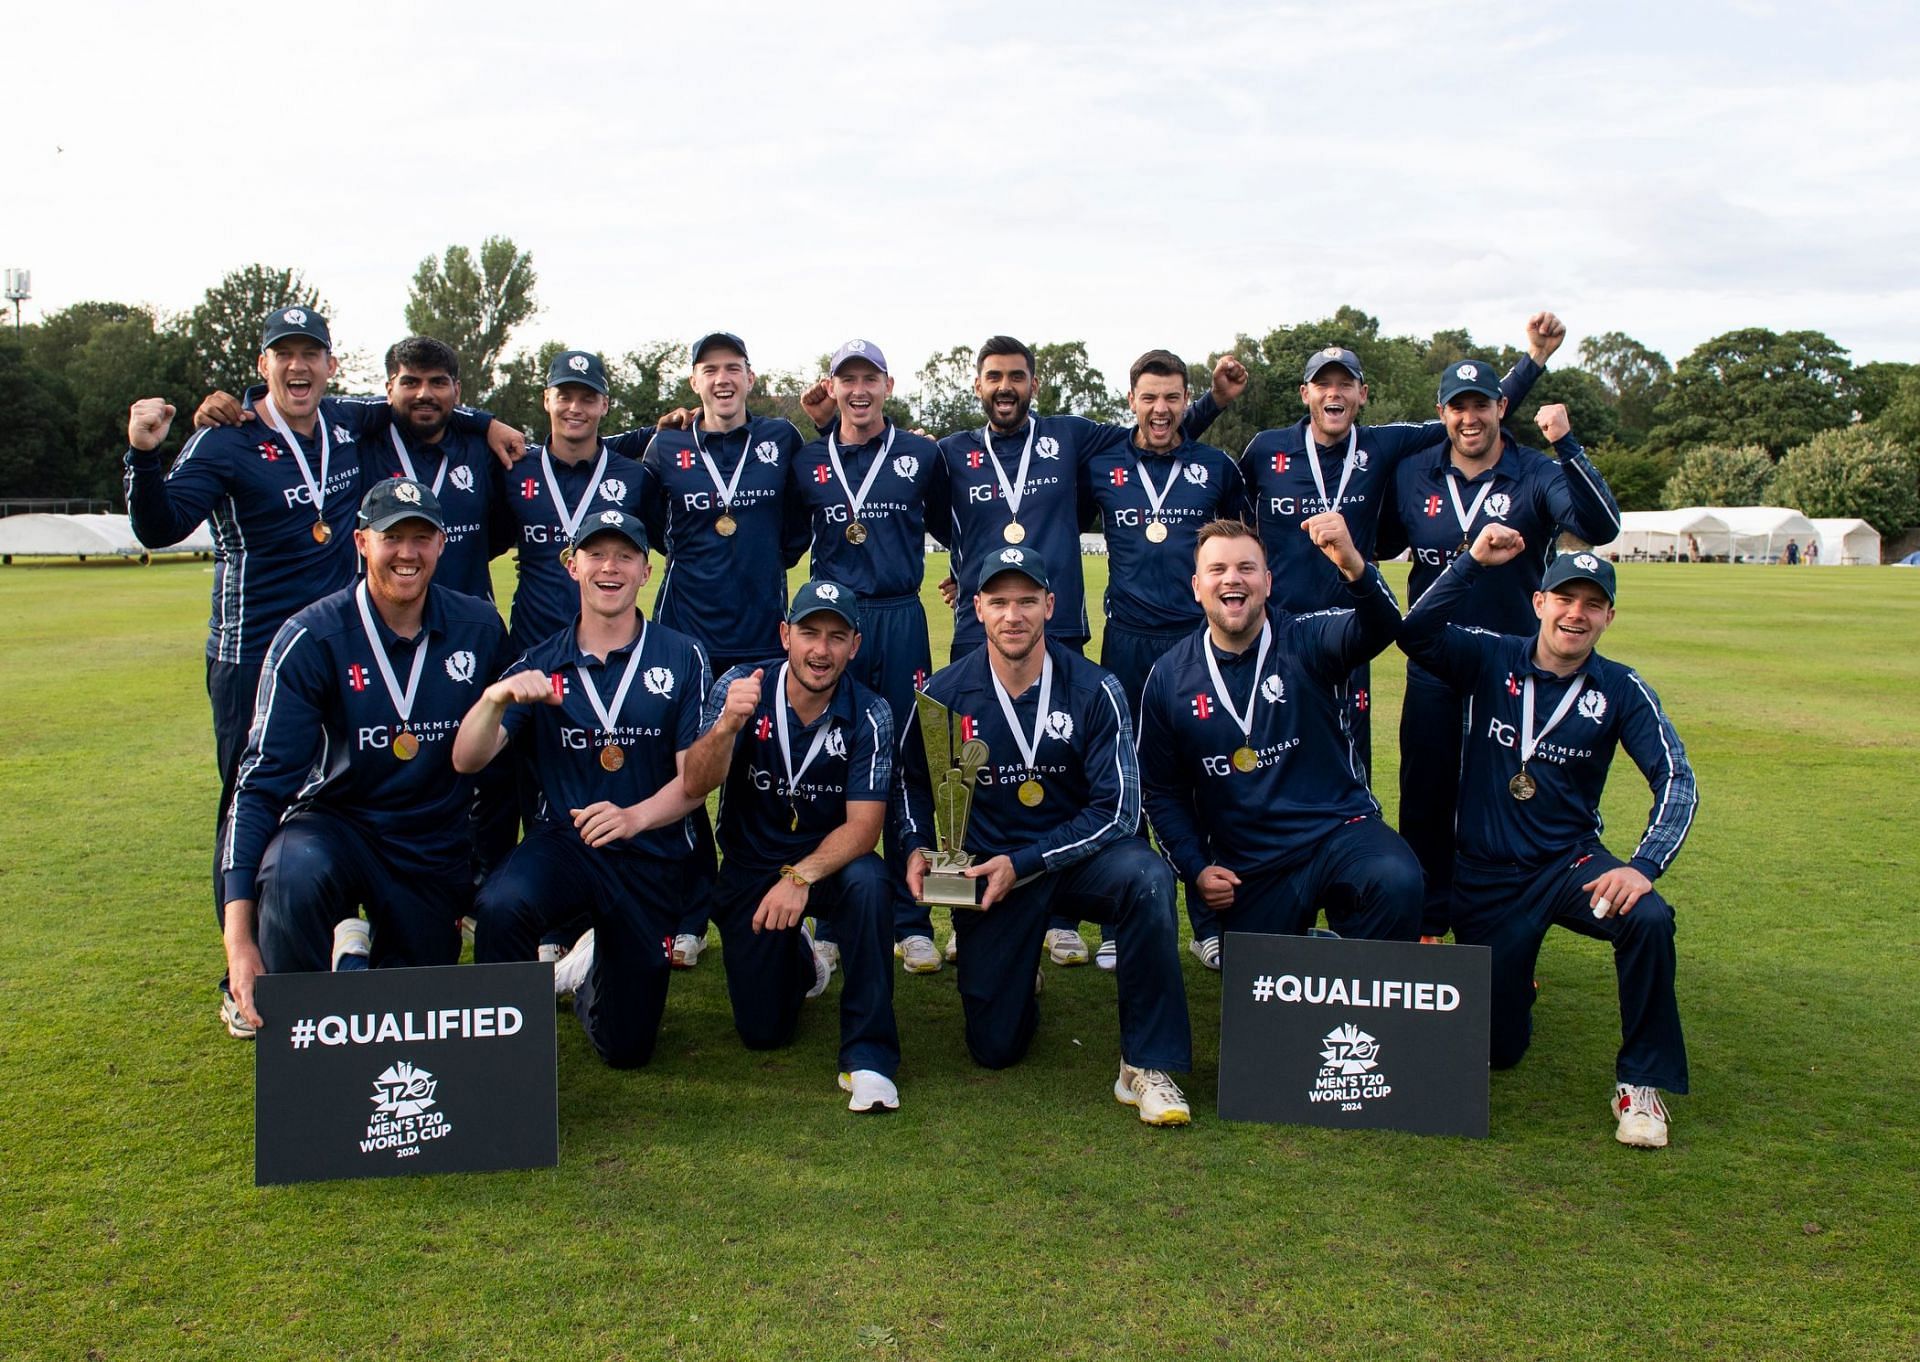 Scotland had won the ICC World Cup Qualifiers Europe, helping them qualify for the main event